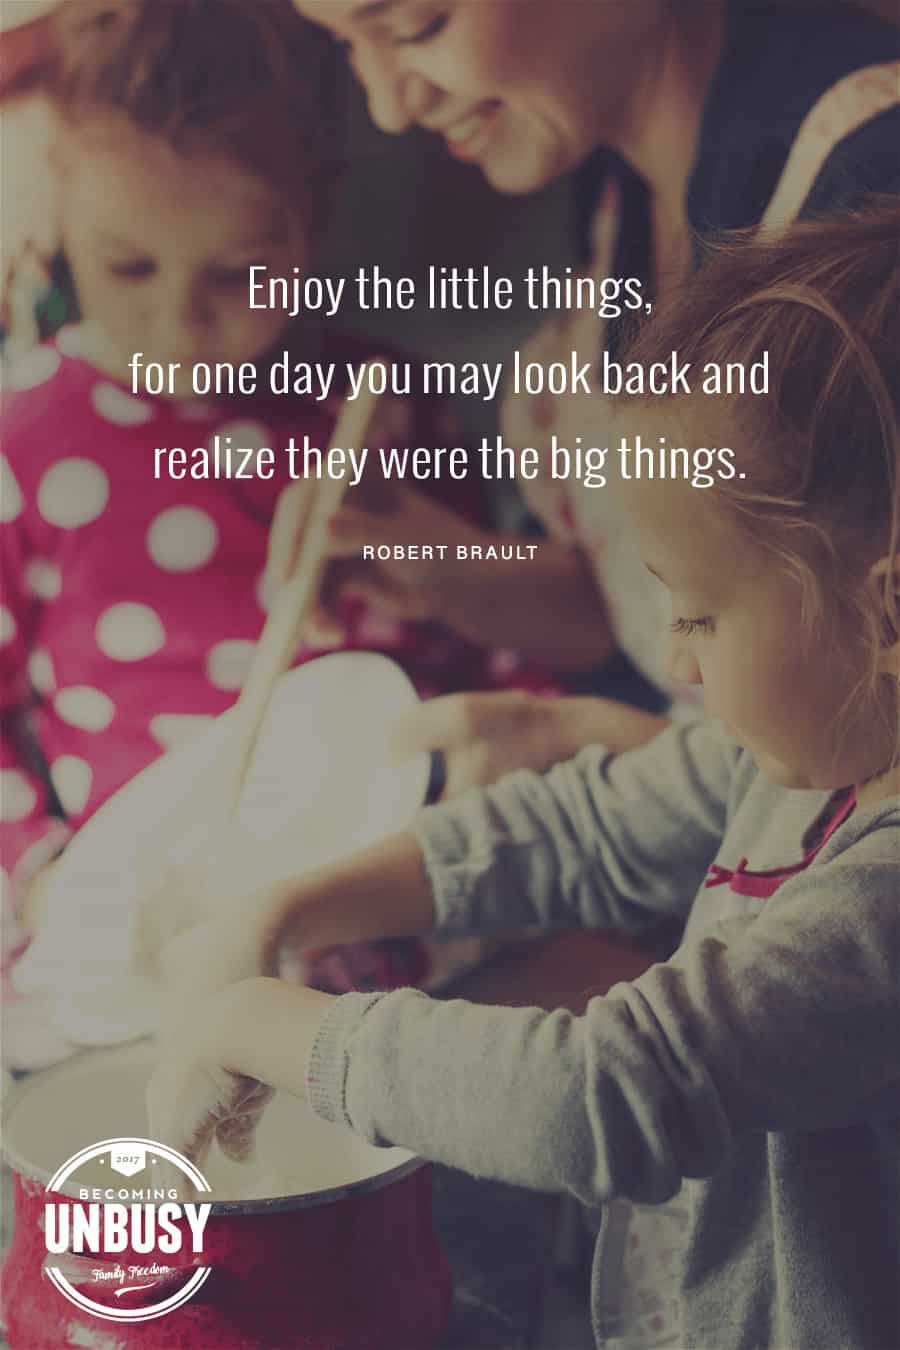 Enjoy the little things, for one day you may look back and realize they were the big things. #quote *Love this quote and this entire post